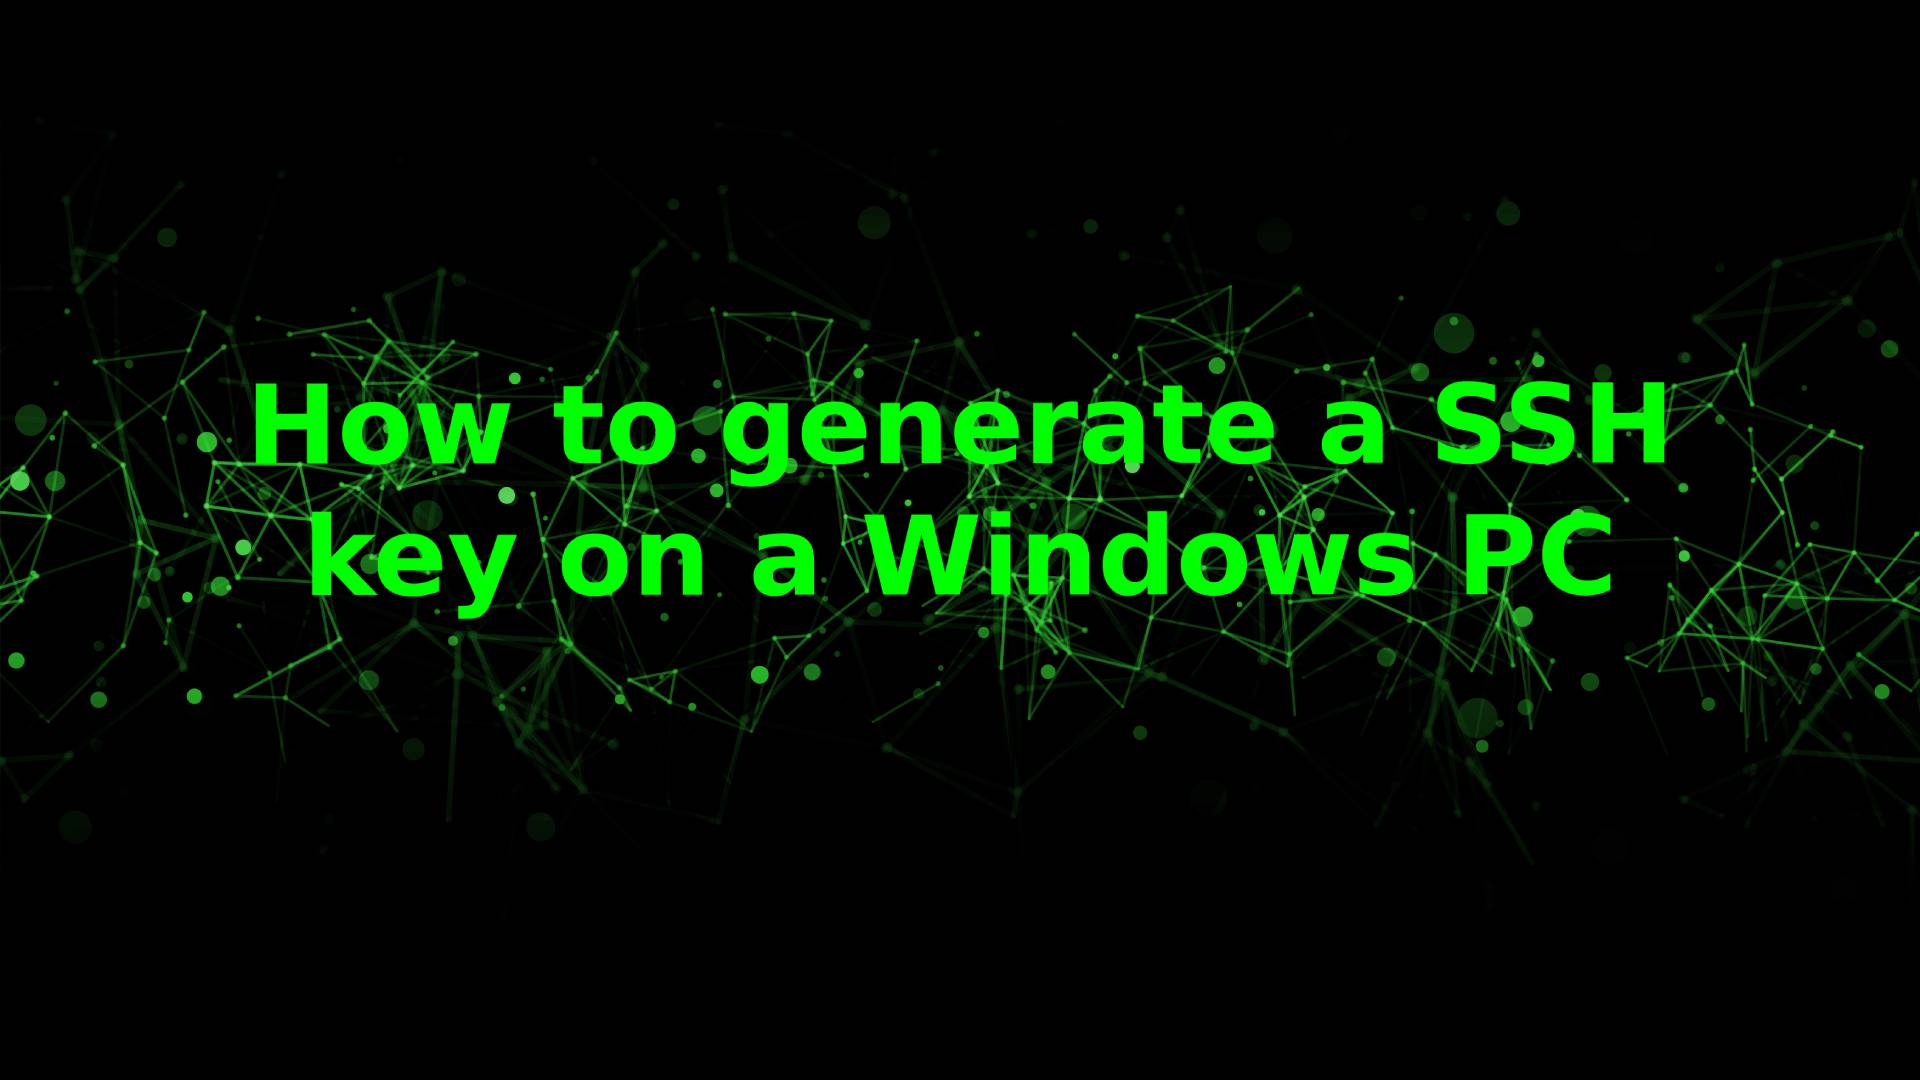 How to generate a SSH key on a windows PC